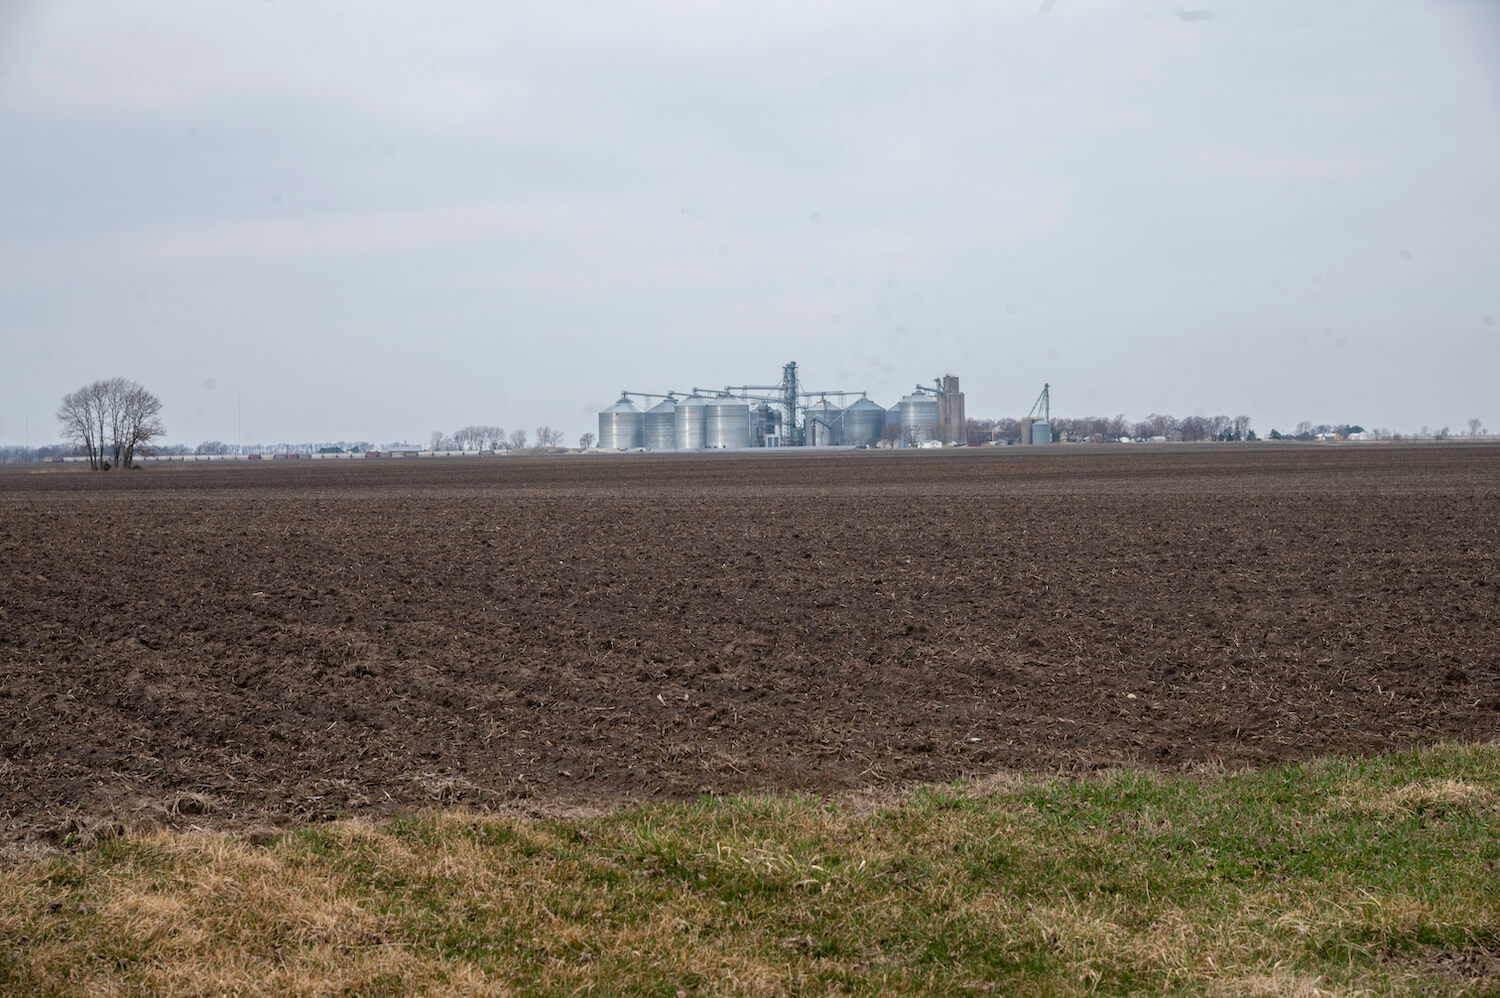 Farm acreage at the northeast corner of 600E and 700N, Bement, Il belonging to Baloo Enterprises on Saturday, March 13, 2021. April 2021